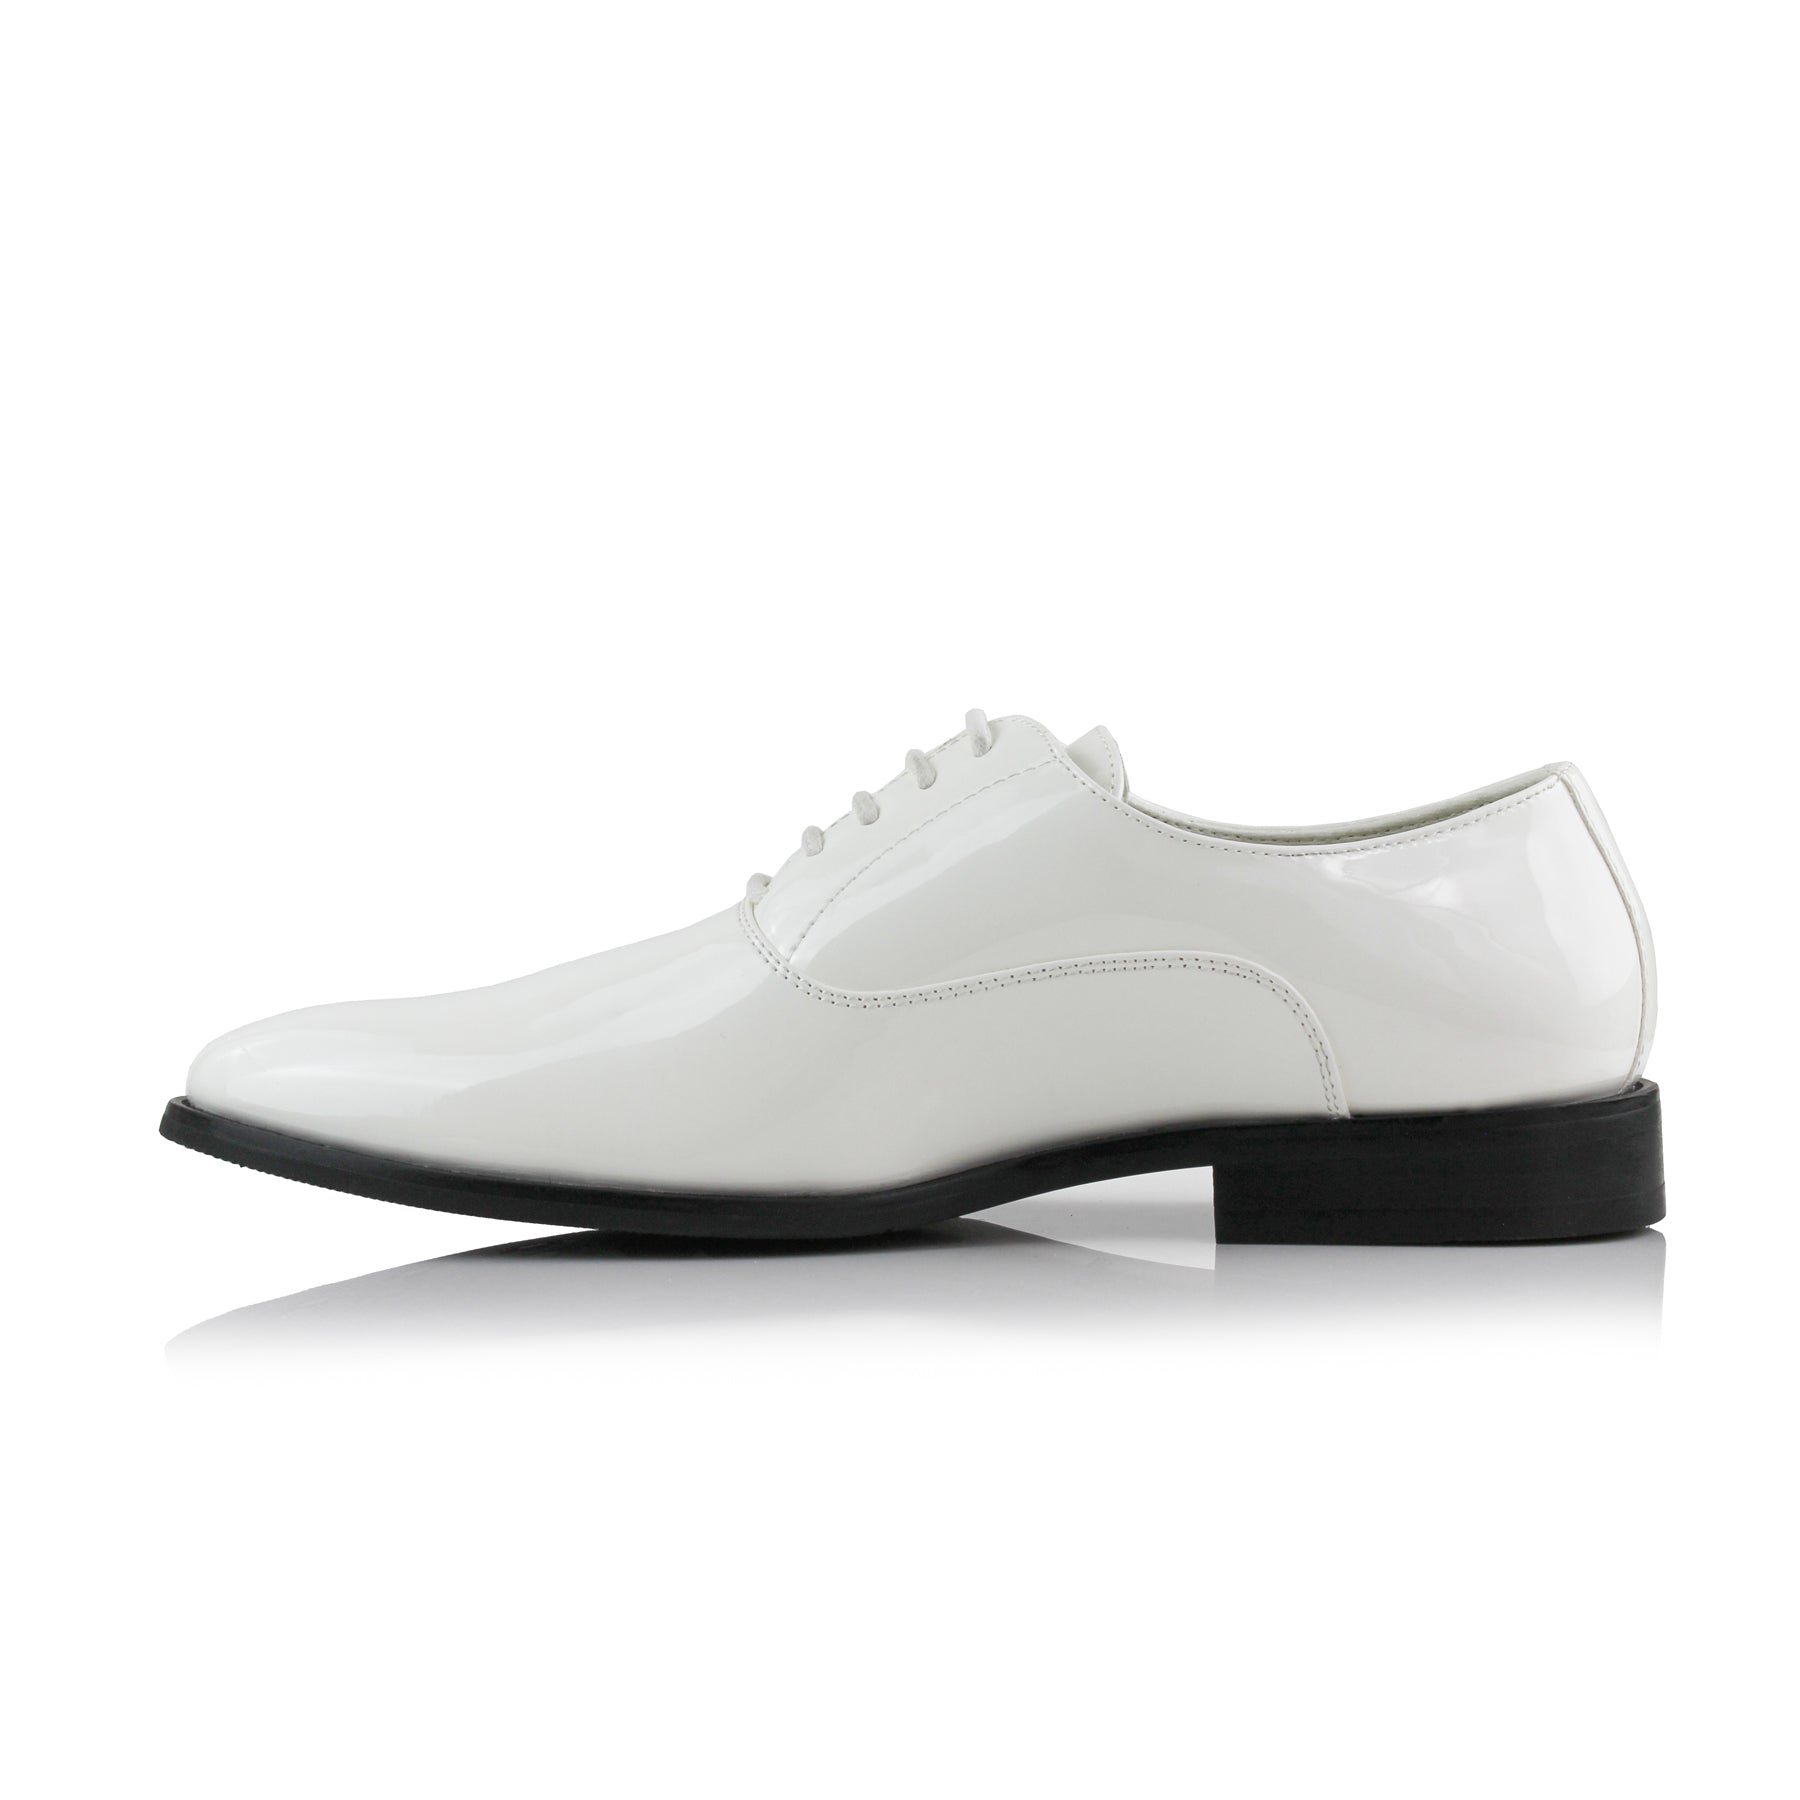 Faux Patent Leather Oxfords | George by Ferro Aldo | Conal Footwear | Inner Side Angle View